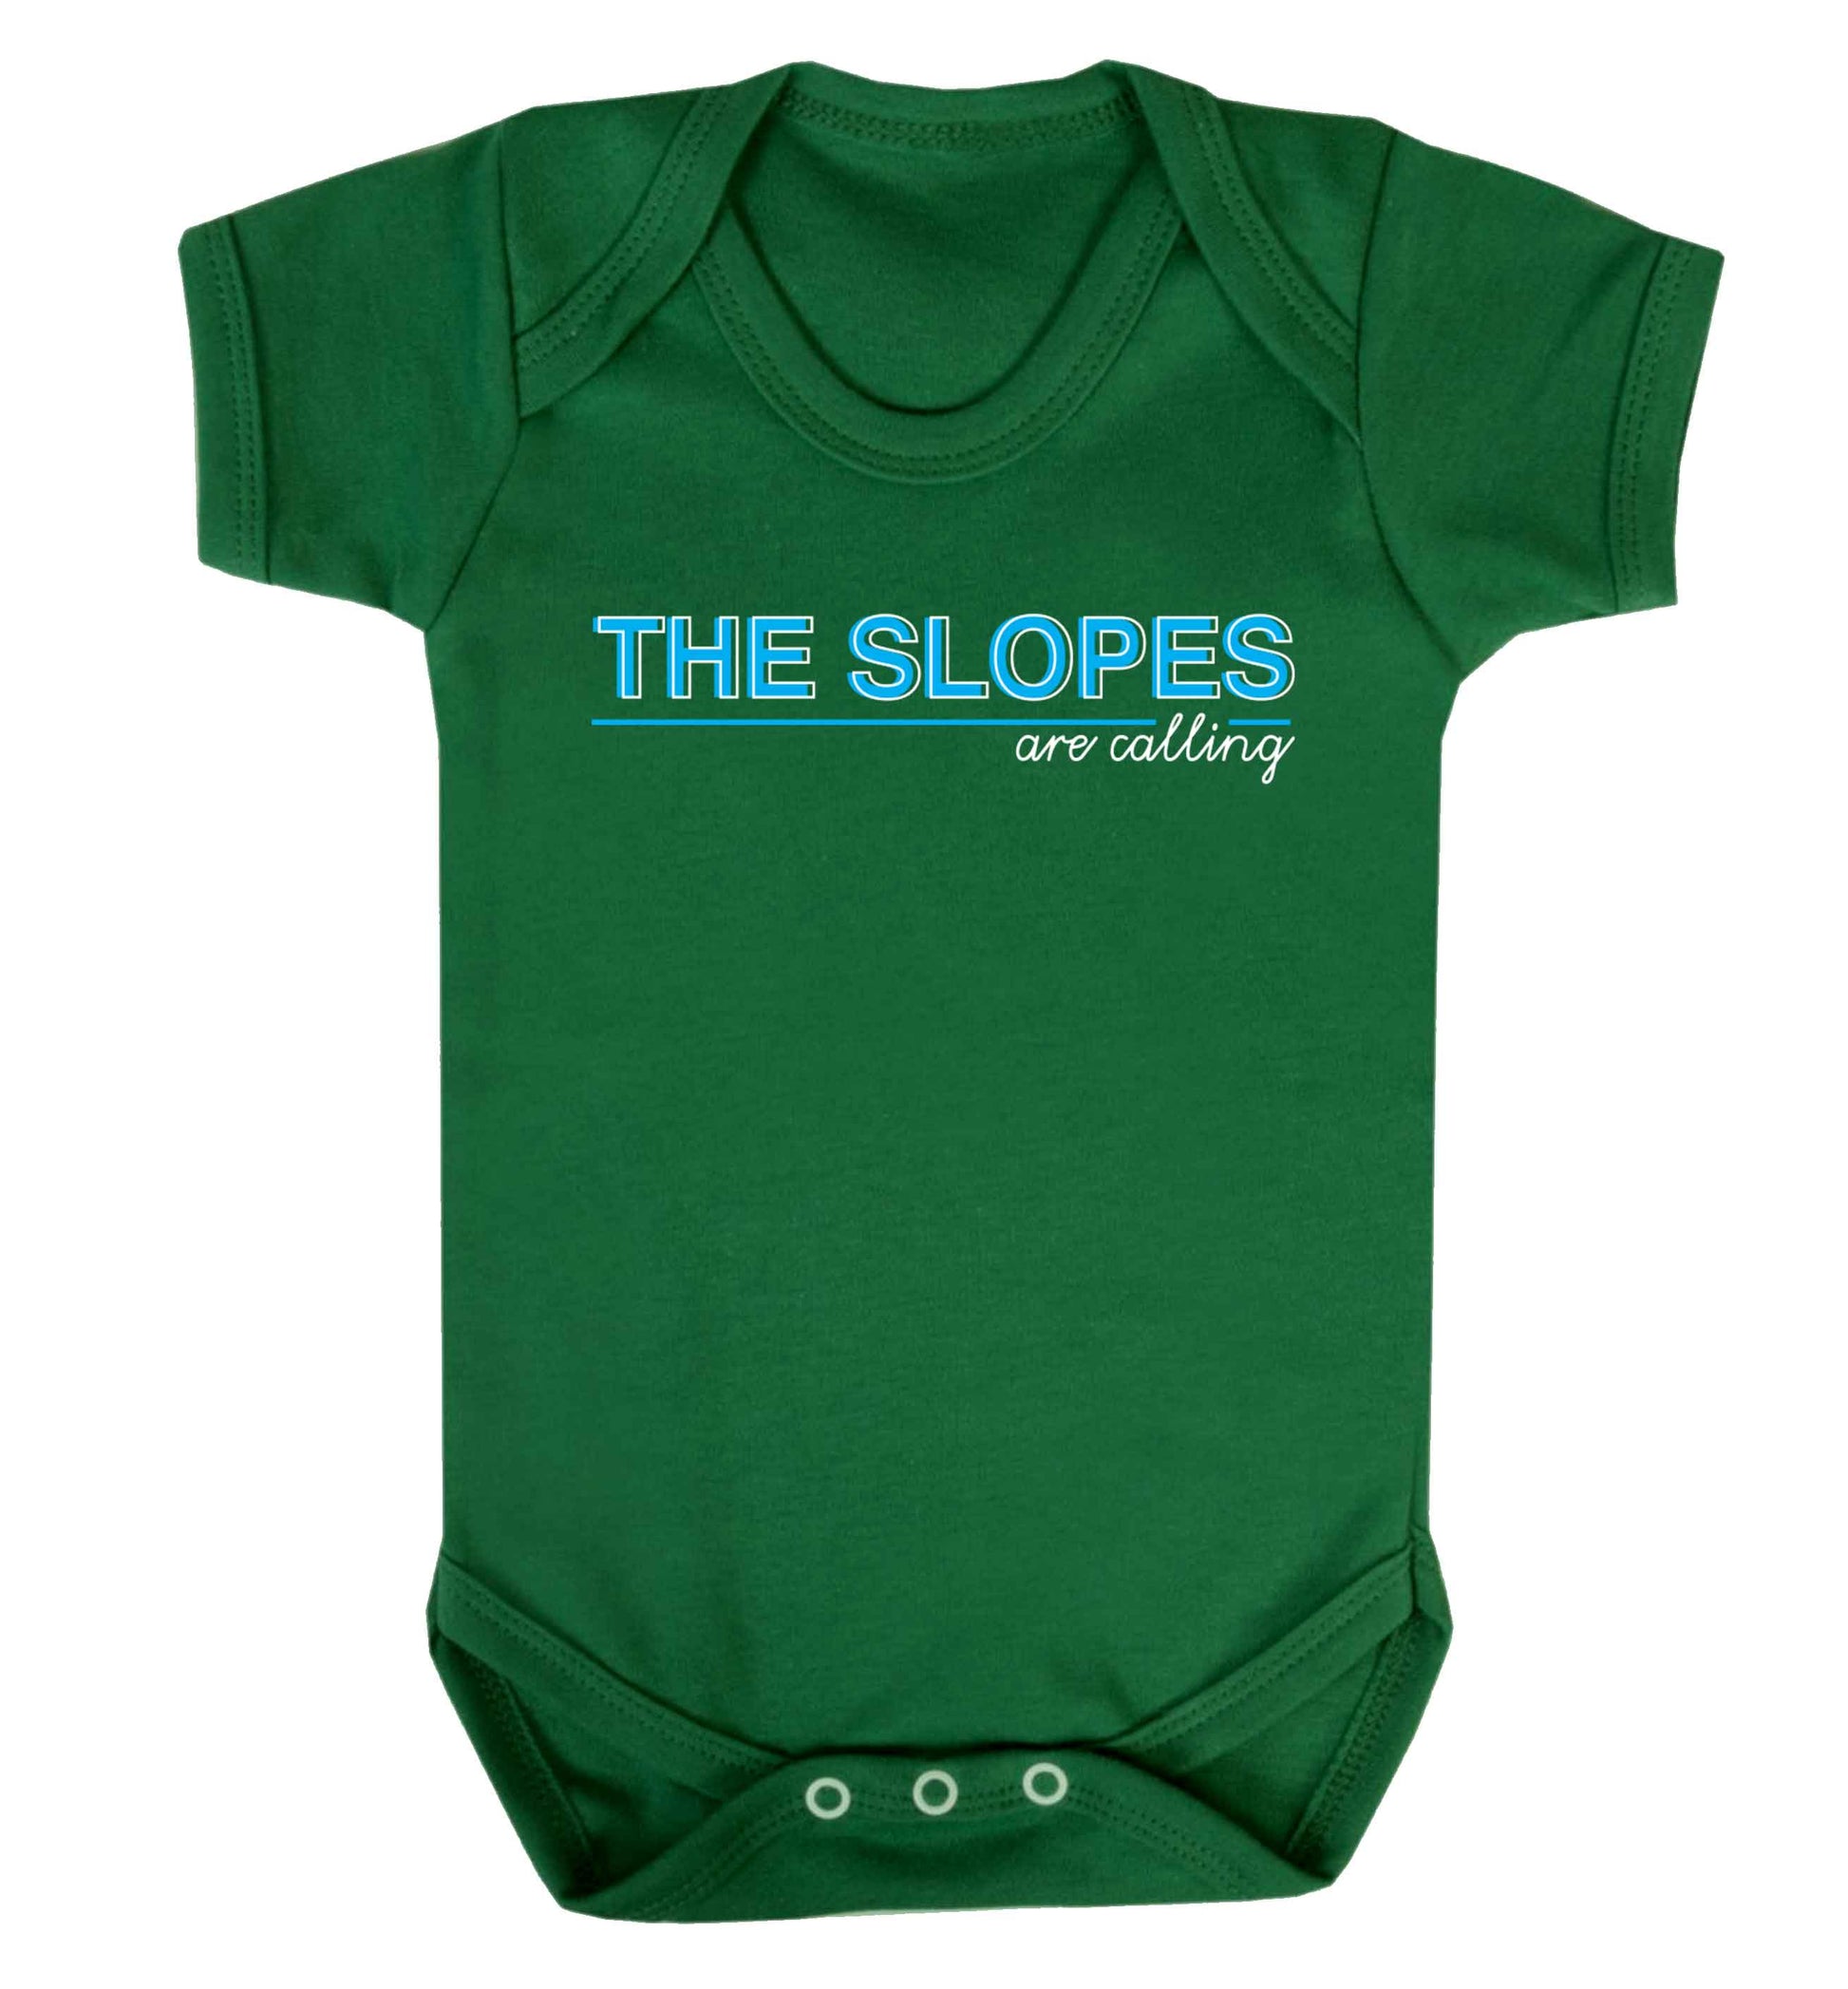 The slopes are calling Baby Vest green 18-24 months